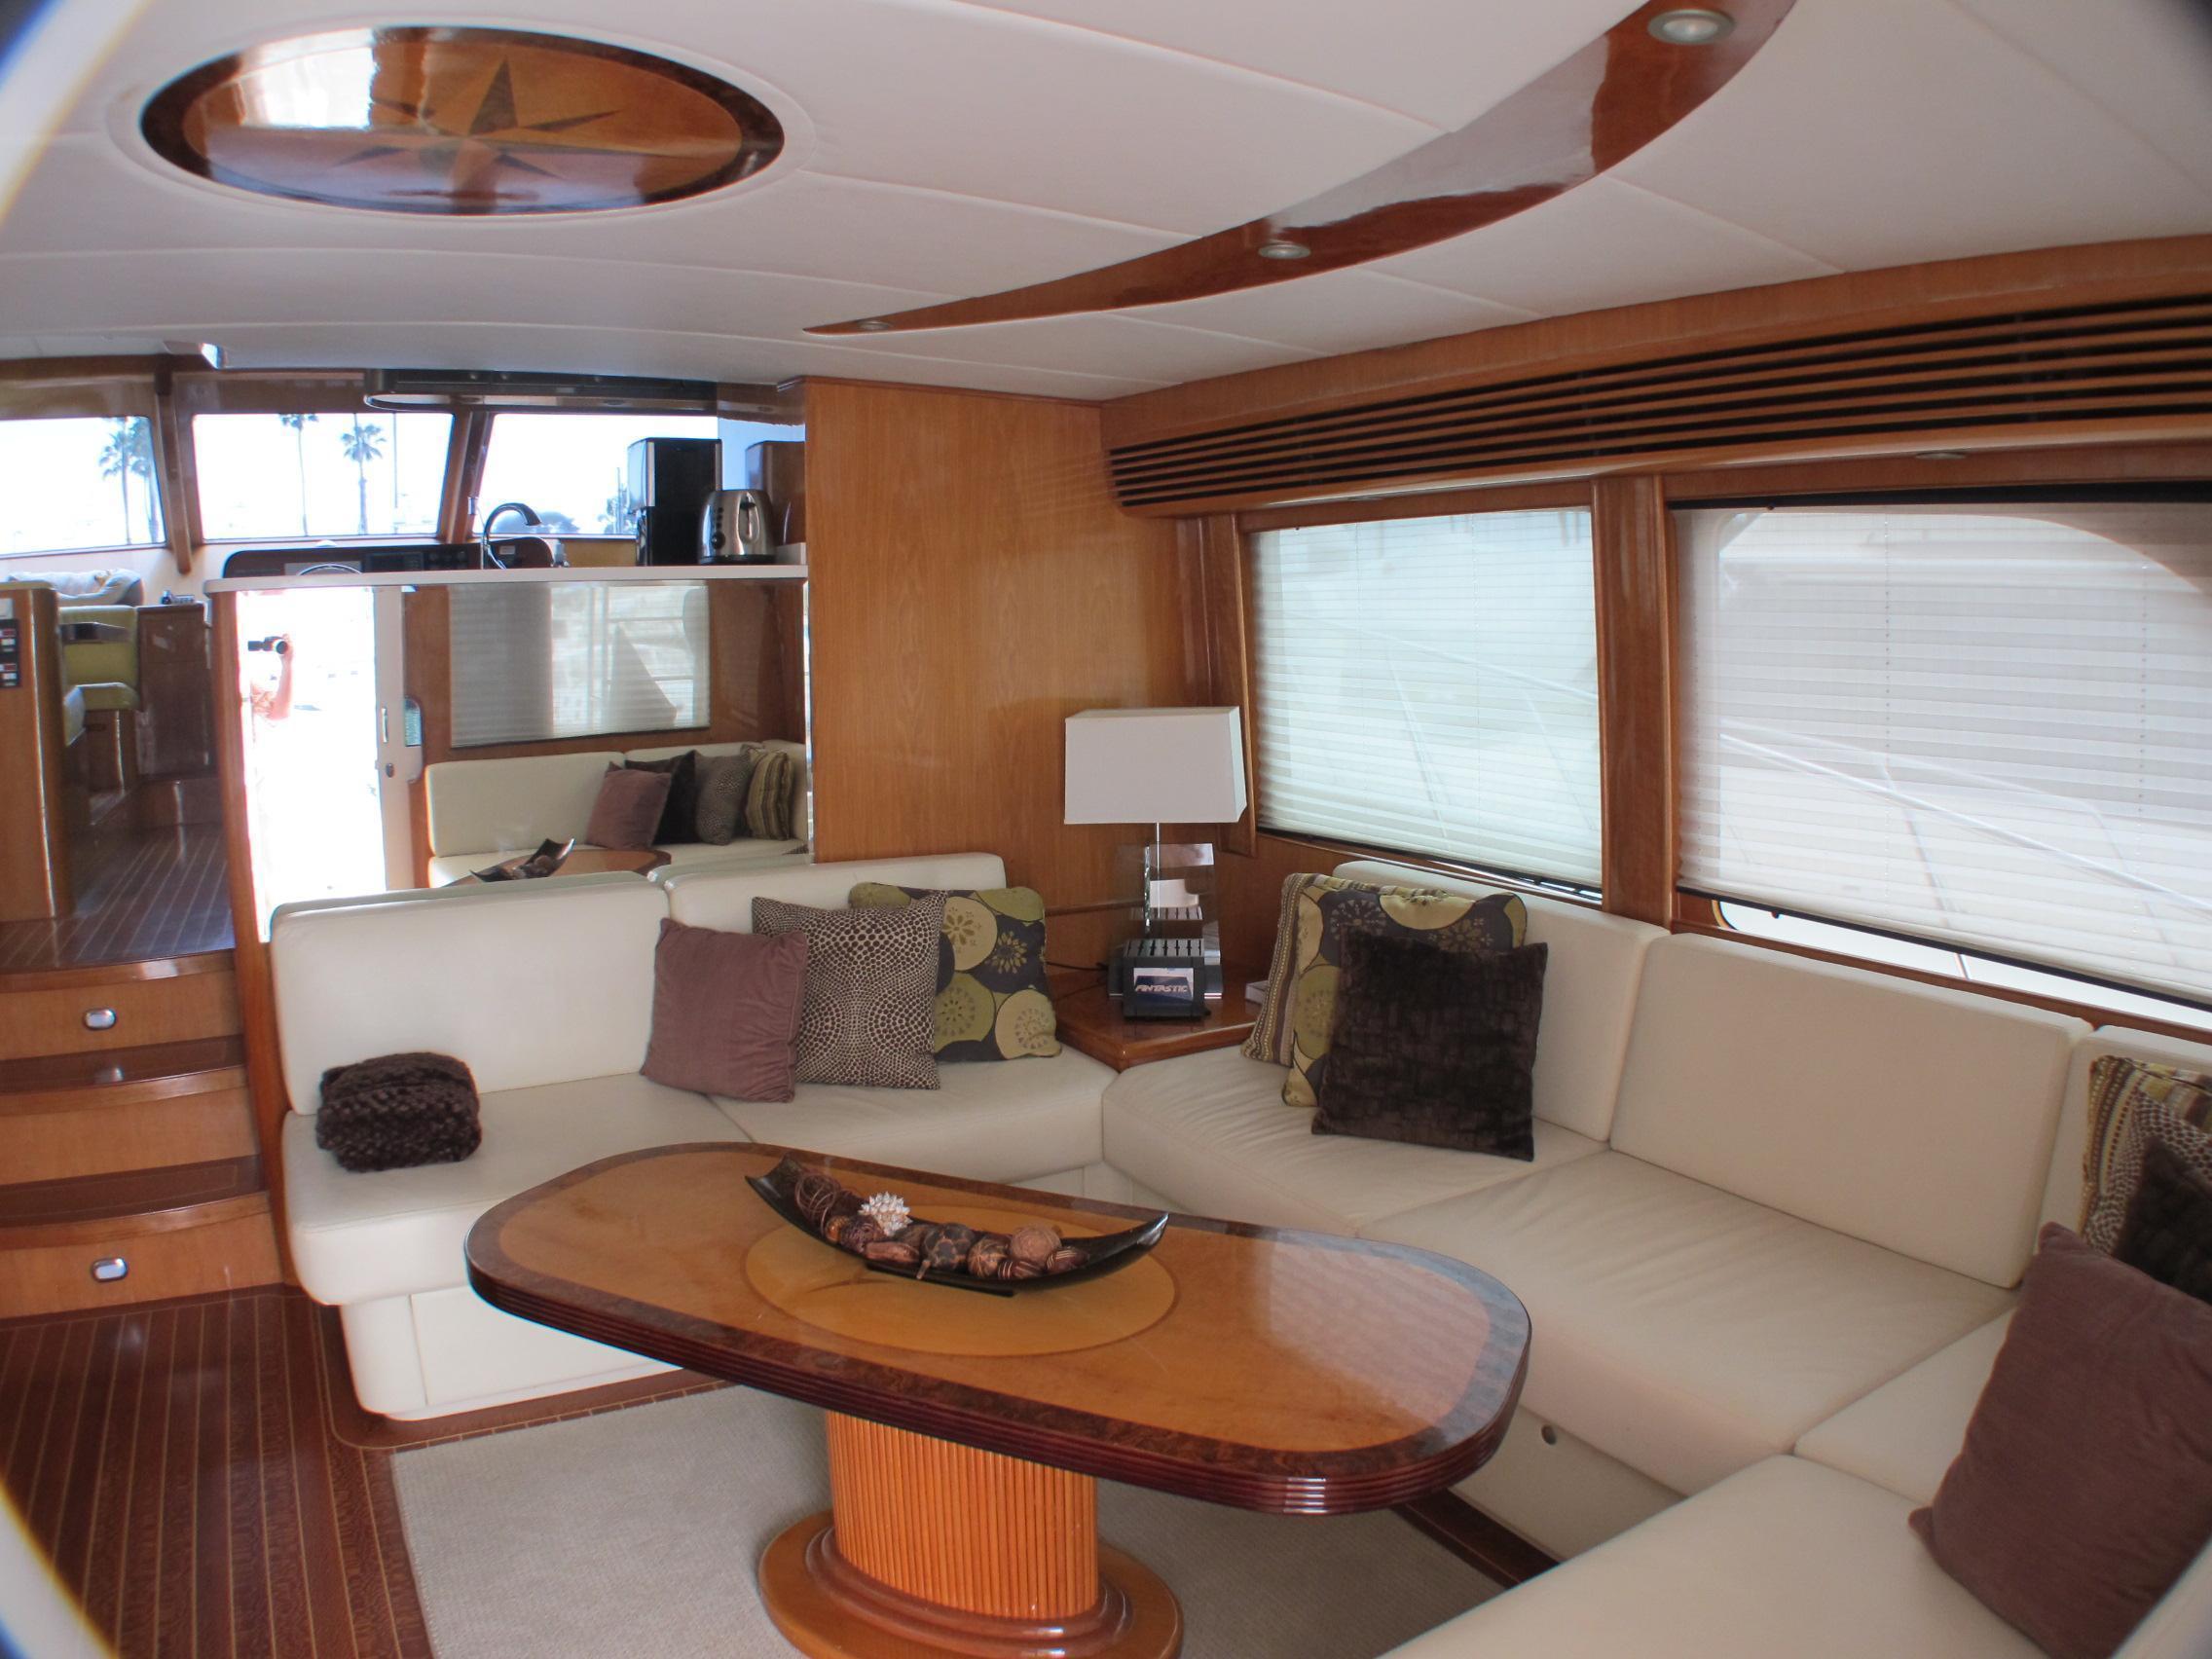 Mikelson Pilothouse Sportfisher, Long Beach